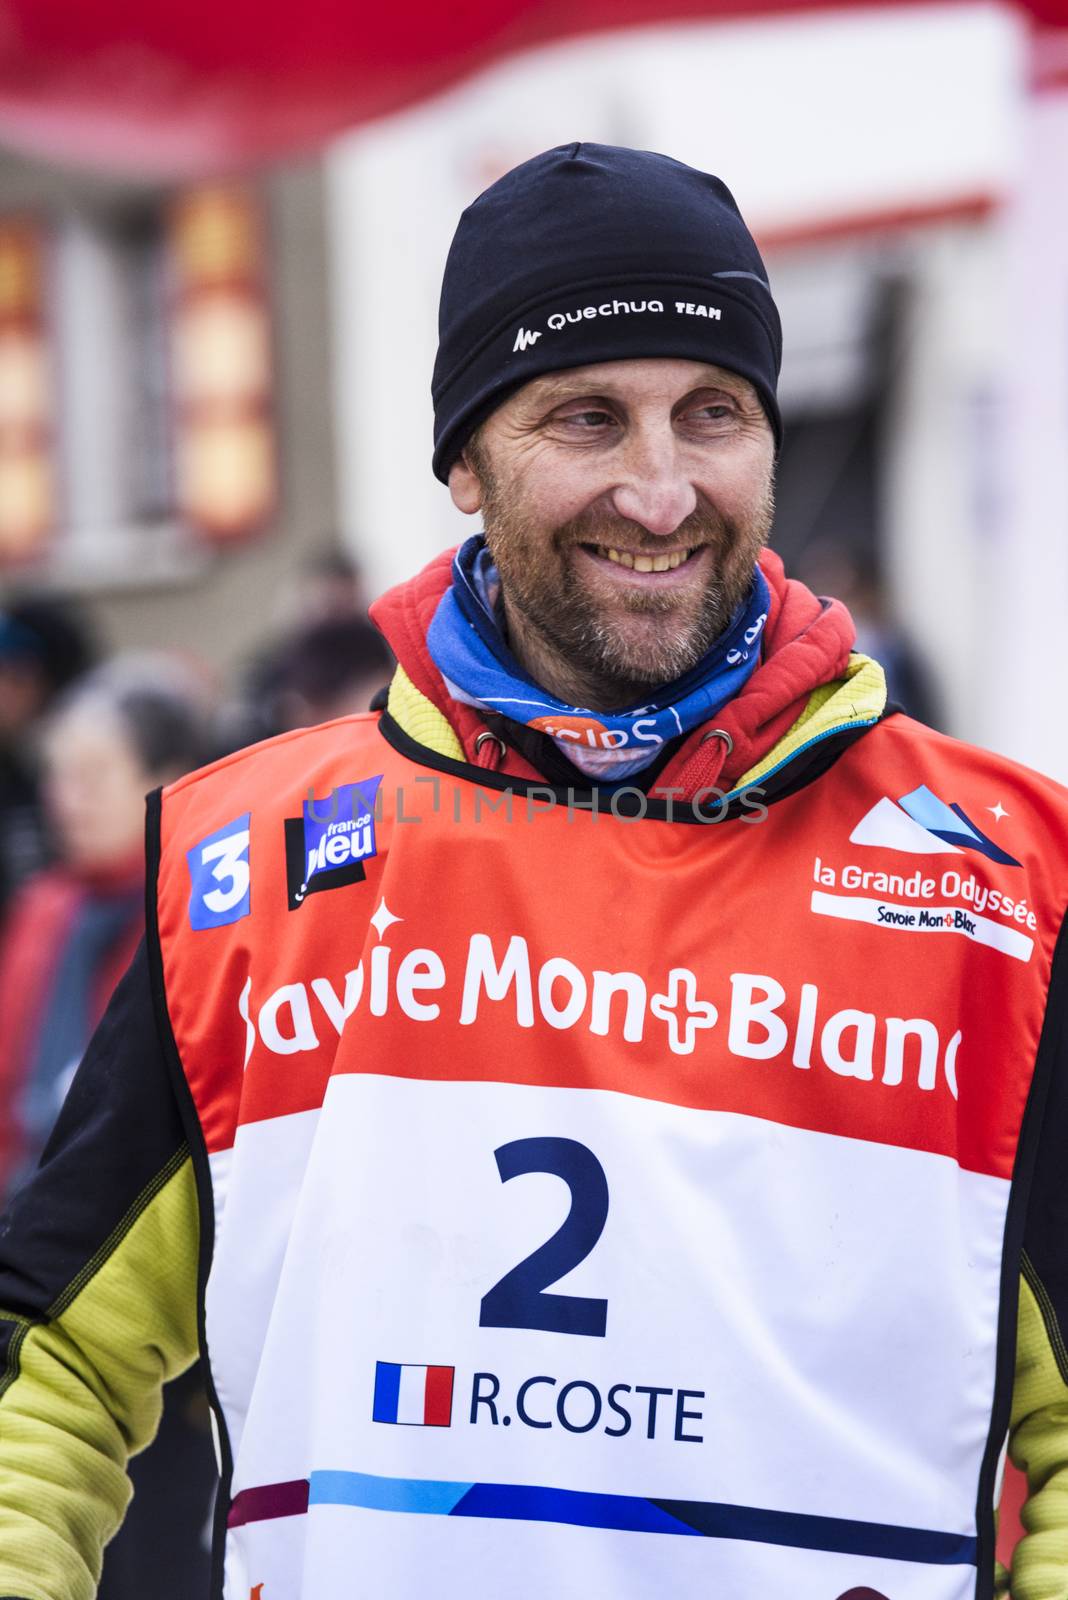 TERMIGNON, VANOISE, FRANCE - JANUARY 20 2016 - Remy COSTE the winner of the GRANDE ODYSSEE the famous and the hardest mushers race, Vanoise, French Alps